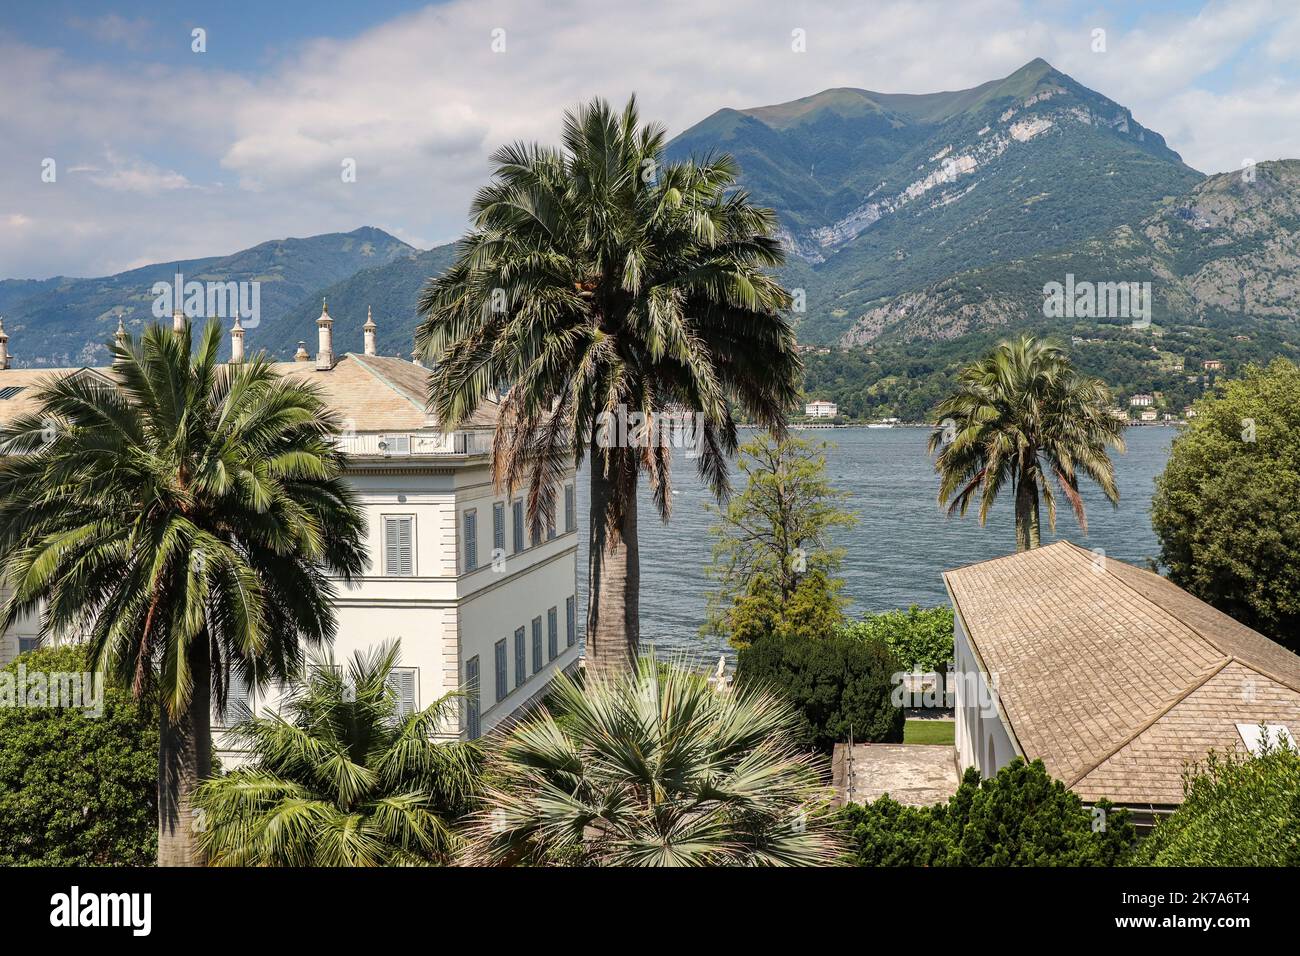 Villa Menzi with Palm Tree in Bellagio. Beautiful View of Italian Architecture with Lake Como and Hilly Mountain in Botanical Garden during Summer Day Stock Photo